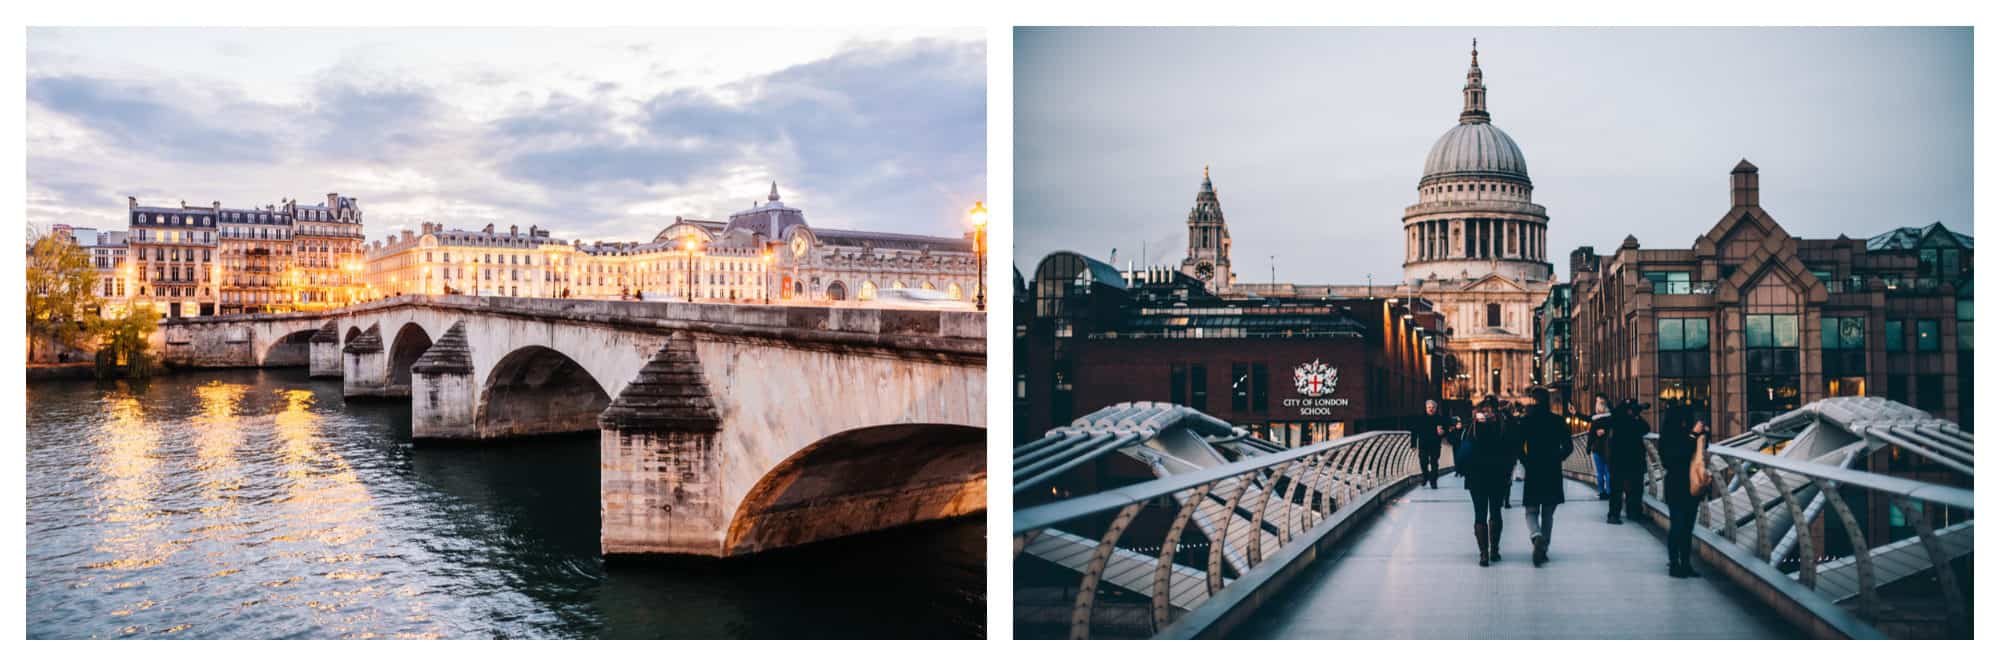 Paris at sunset, a stone bridge straddling the River Seine (left). London's Millenium Bridge with Saint Paul's Cathedral in the background (right).